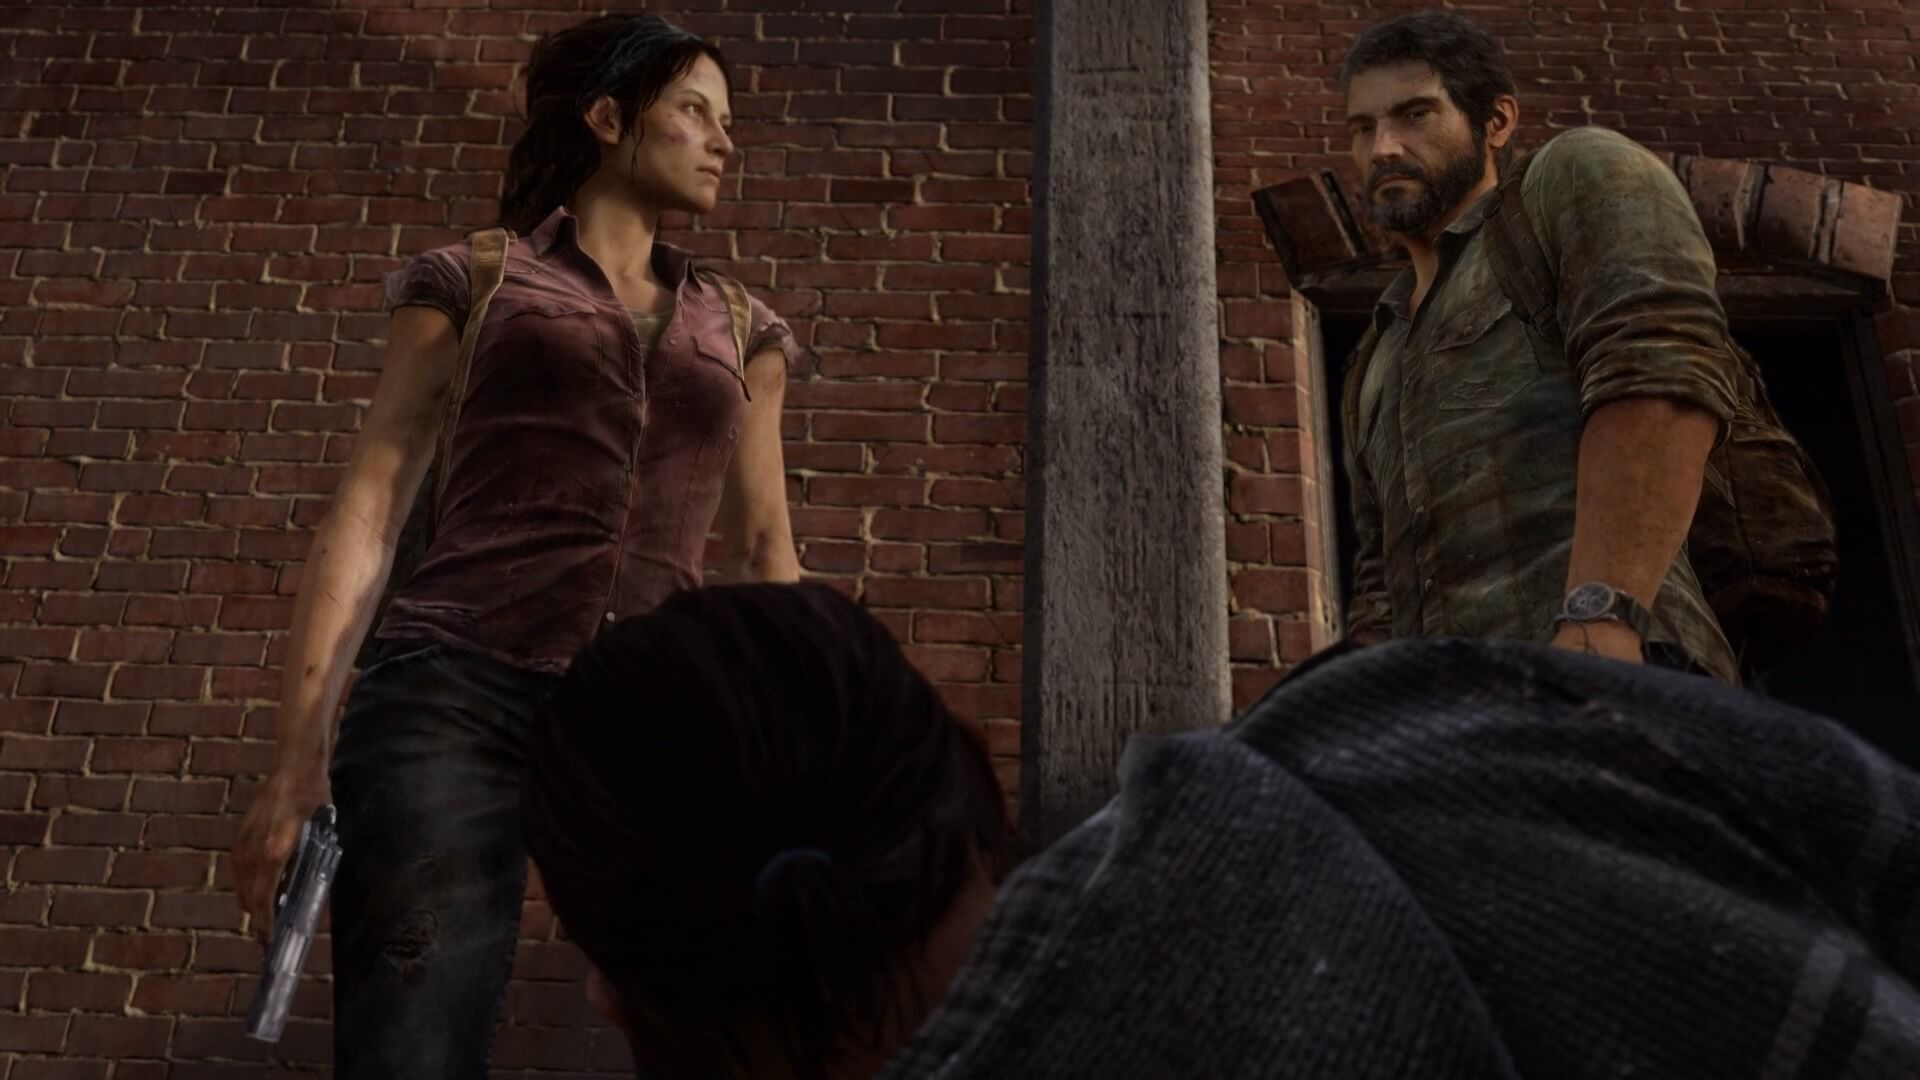 Joel and Ellie go on a road trip in The Last of Us Episode 4 preview - Xfire